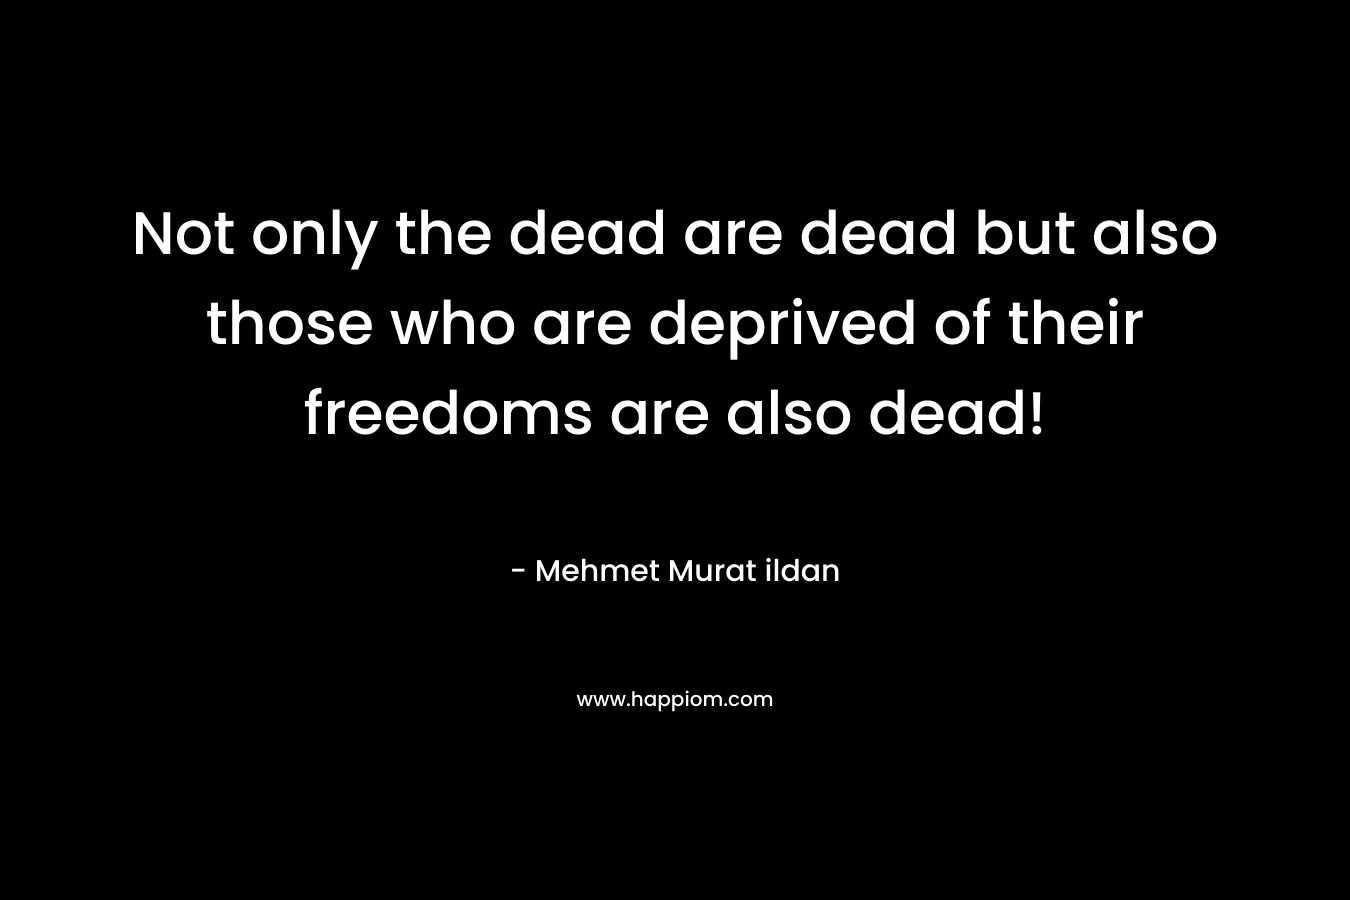 Not only the dead are dead but also those who are deprived of their freedoms are also dead! – Mehmet Murat ildan